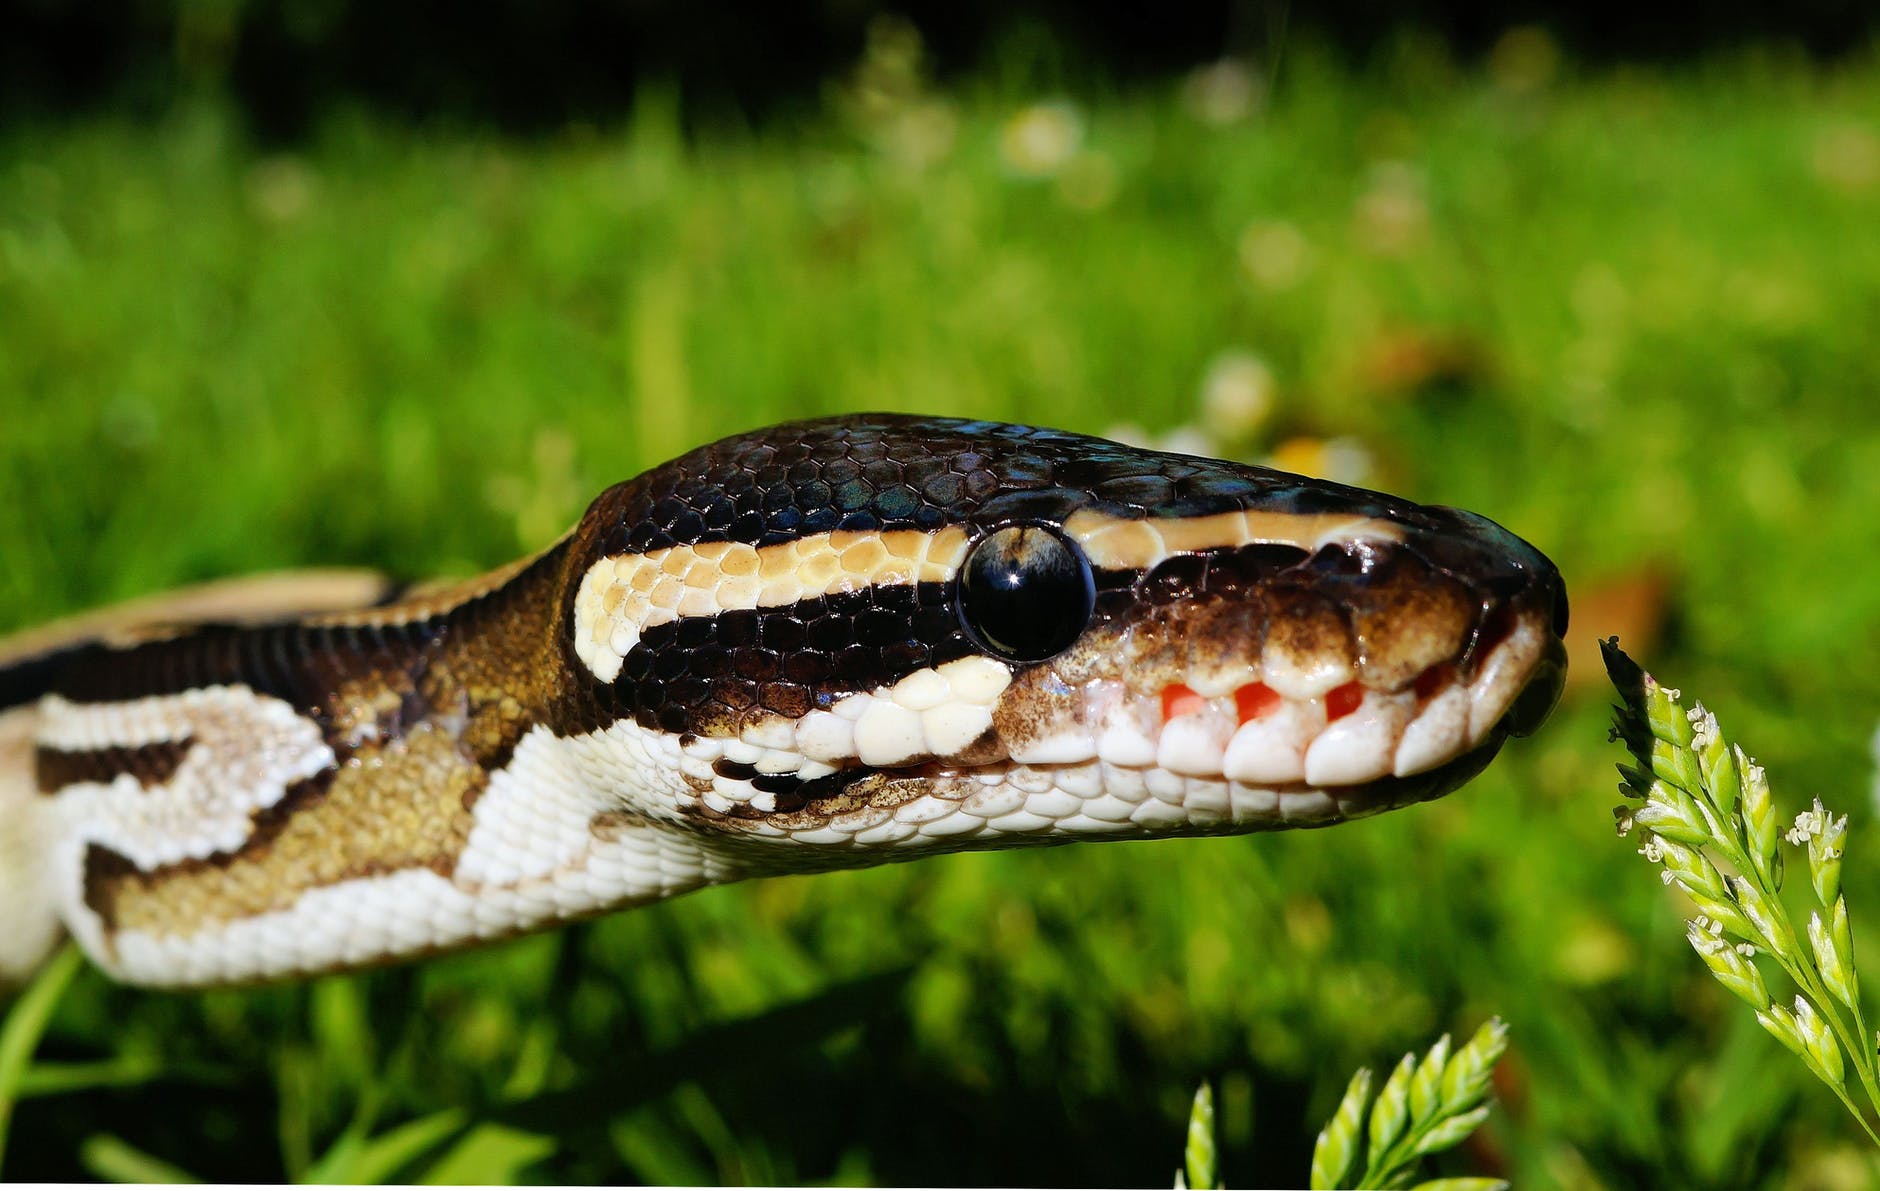 Best Snake Repellent Plants To Keep Snakes Away From Your Home & Garden